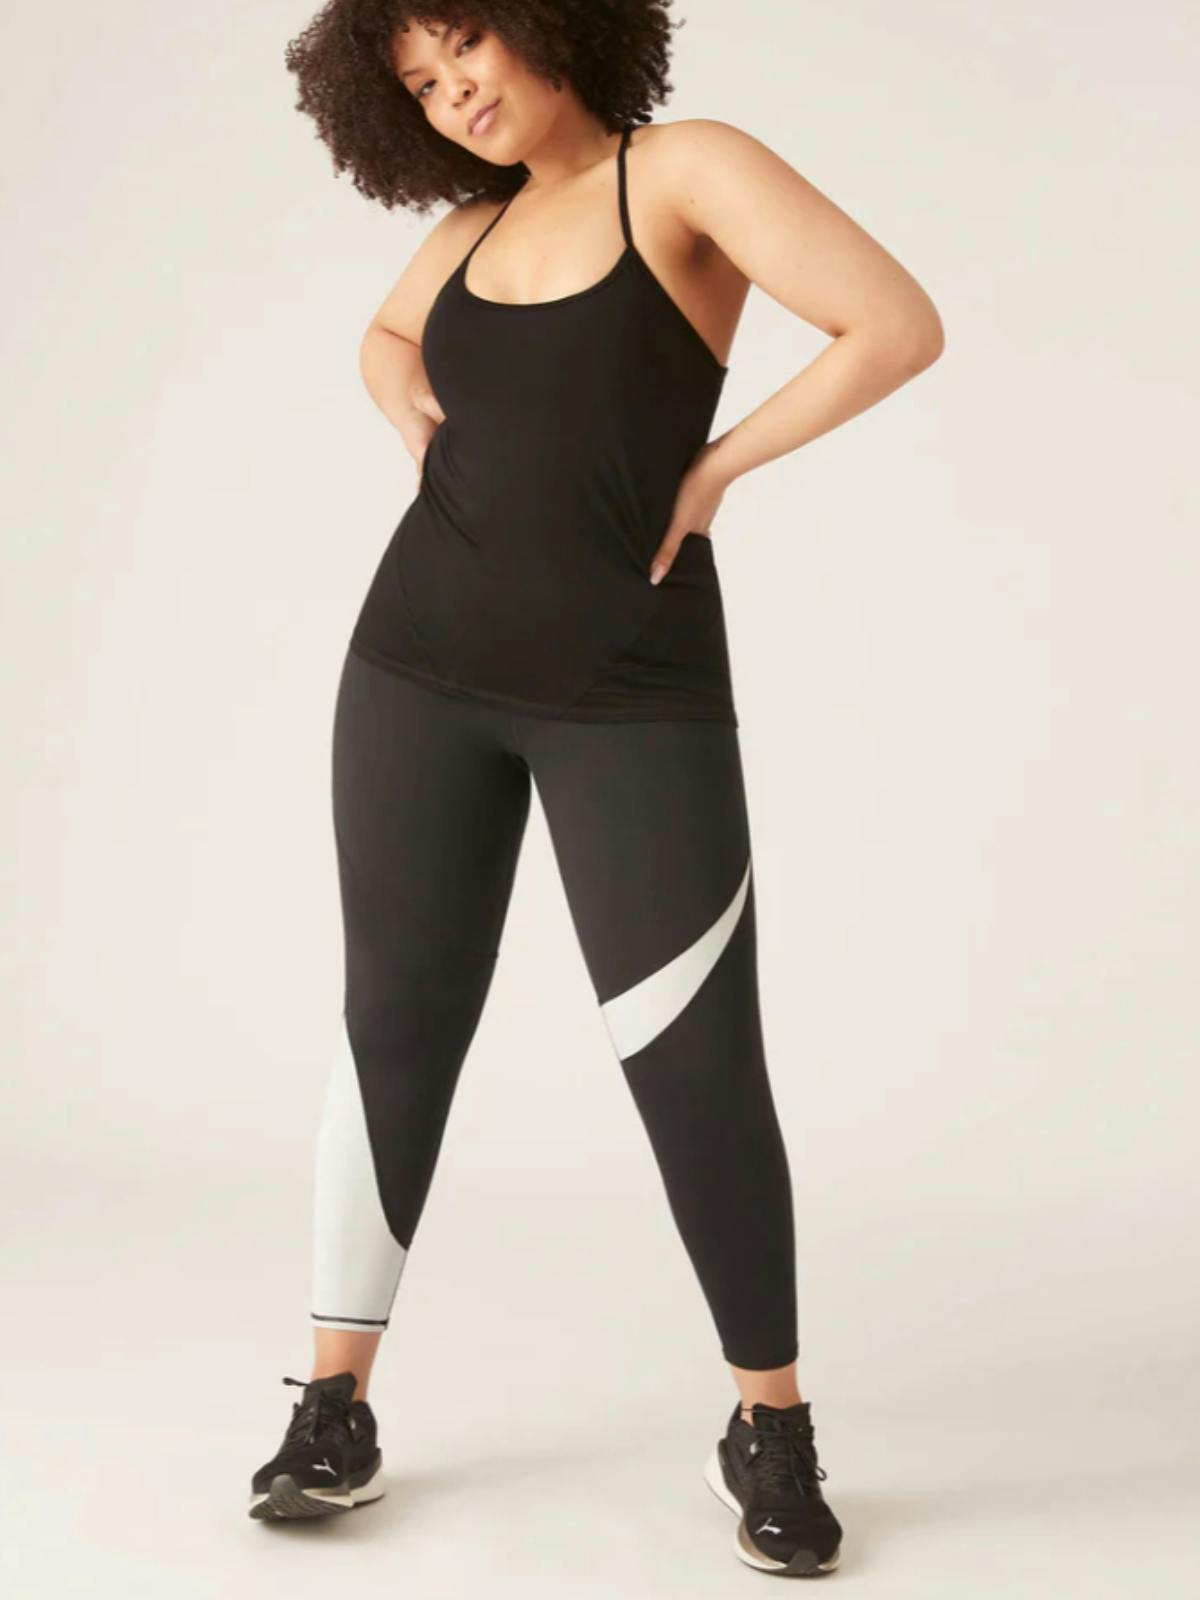 PUMA x ModiBodi 1 in 1 Active Short | Period Leggings to Wear During Your  Next Workout — No Tampons, Cups, or Pads Needed! | POPSUGAR Fitness UK  Photo 7